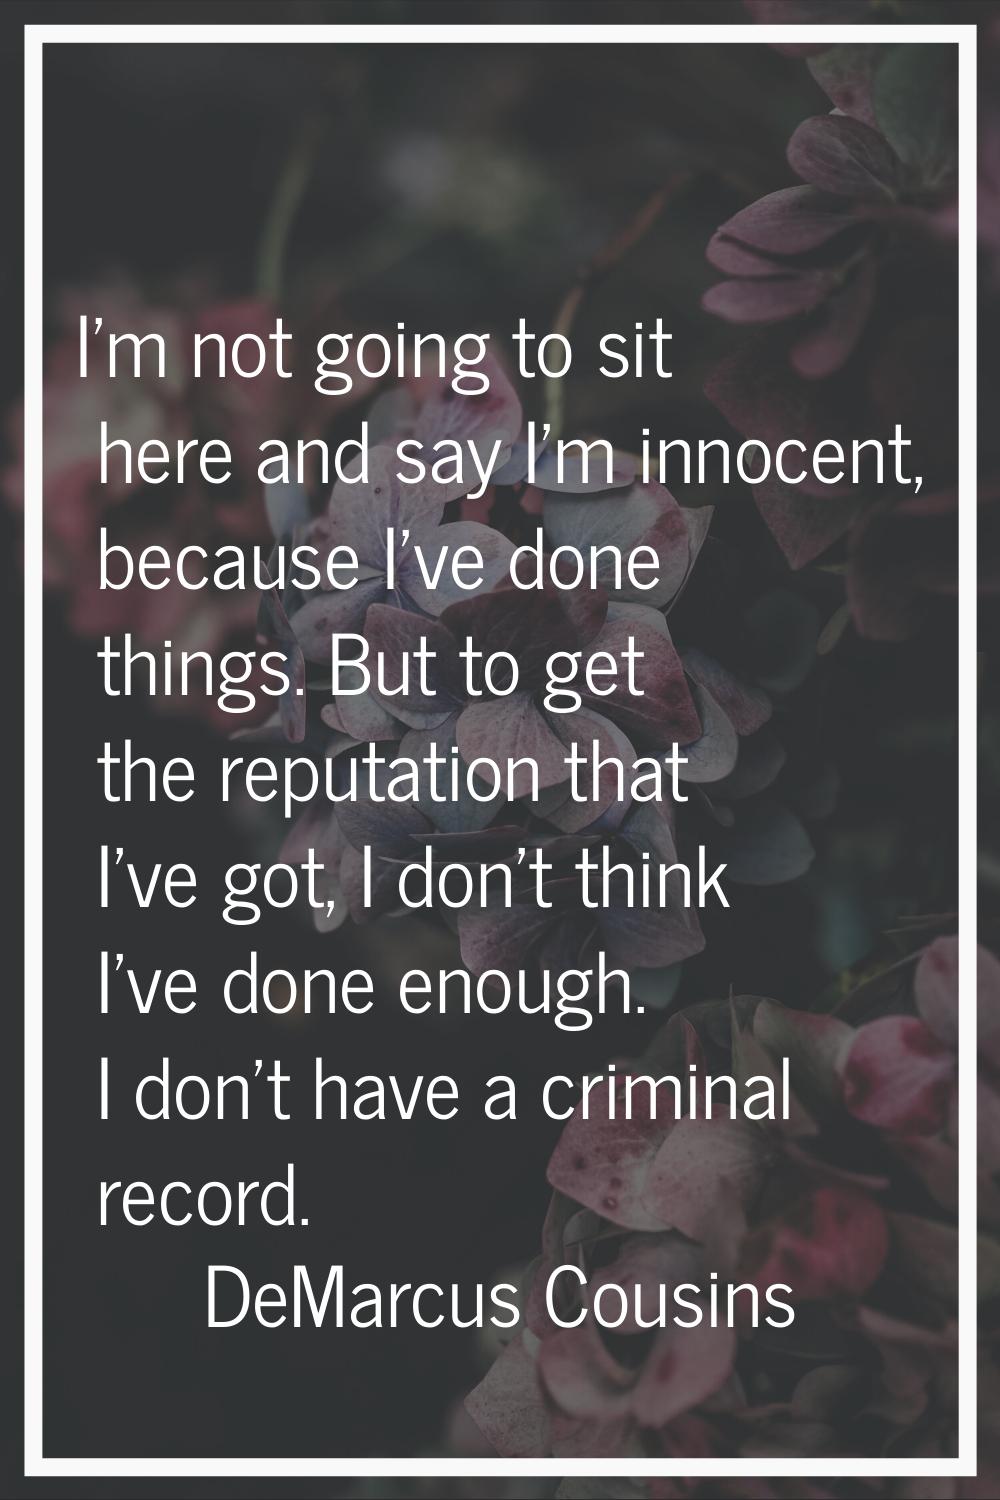 I'm not going to sit here and say I'm innocent, because I've done things. But to get the reputation